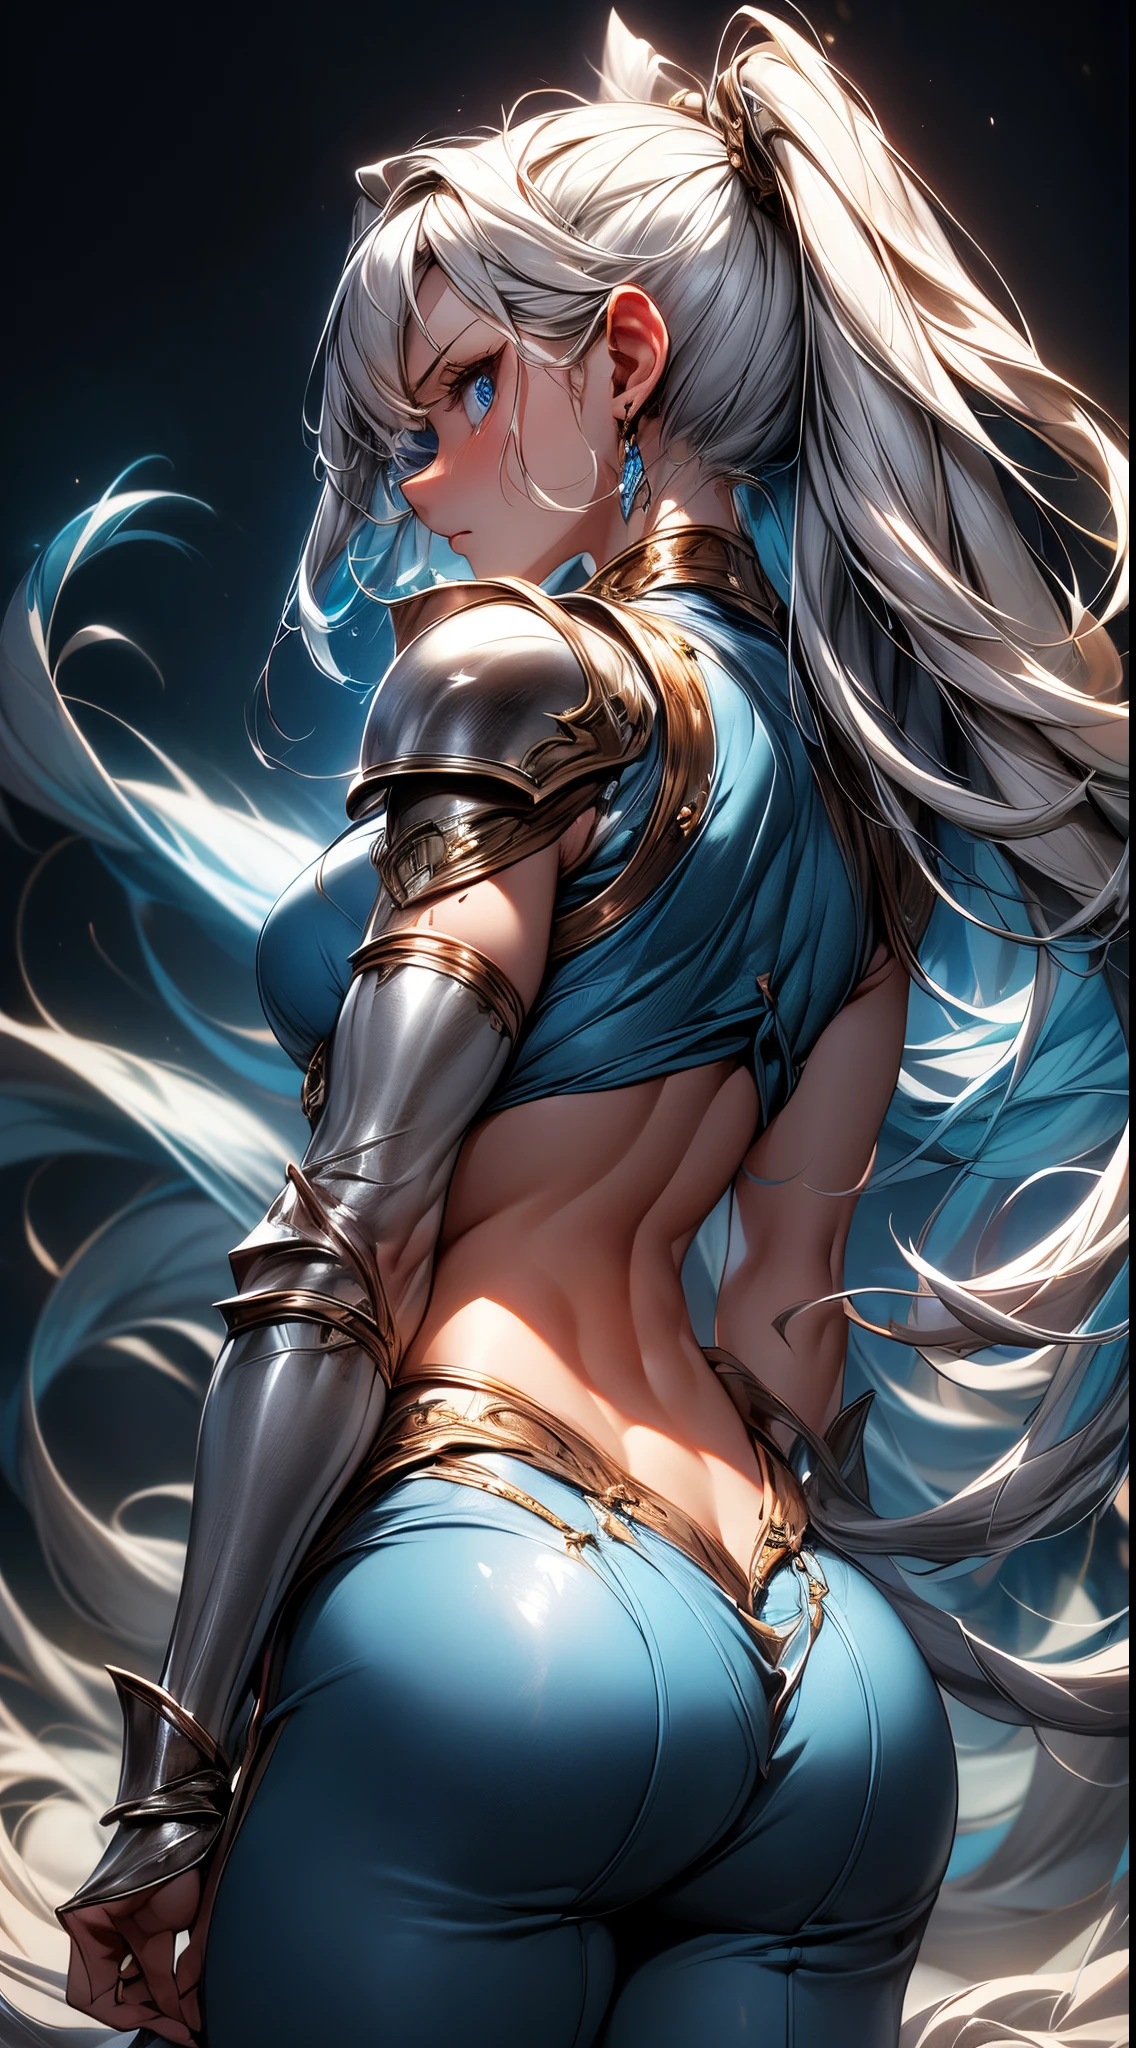 absurderes ,1 girl,Serious,Silver hair,worried woman ,Wolf ears,Blue eyes,Bikini Armor,Abs,muscular,Silver Gauntlet ,leather waist seat,BREAK,Dynamic Angle,Dynamic lighting,Wasteland,Fantasy,BREAK,(close range),(back view,From  below :1.2),looking back,Best Quality,Insanely detailed,Hyper realistic, Perfect Anatomy,Perfect five fingers,Vibrant colors,amazing,superfine illustration